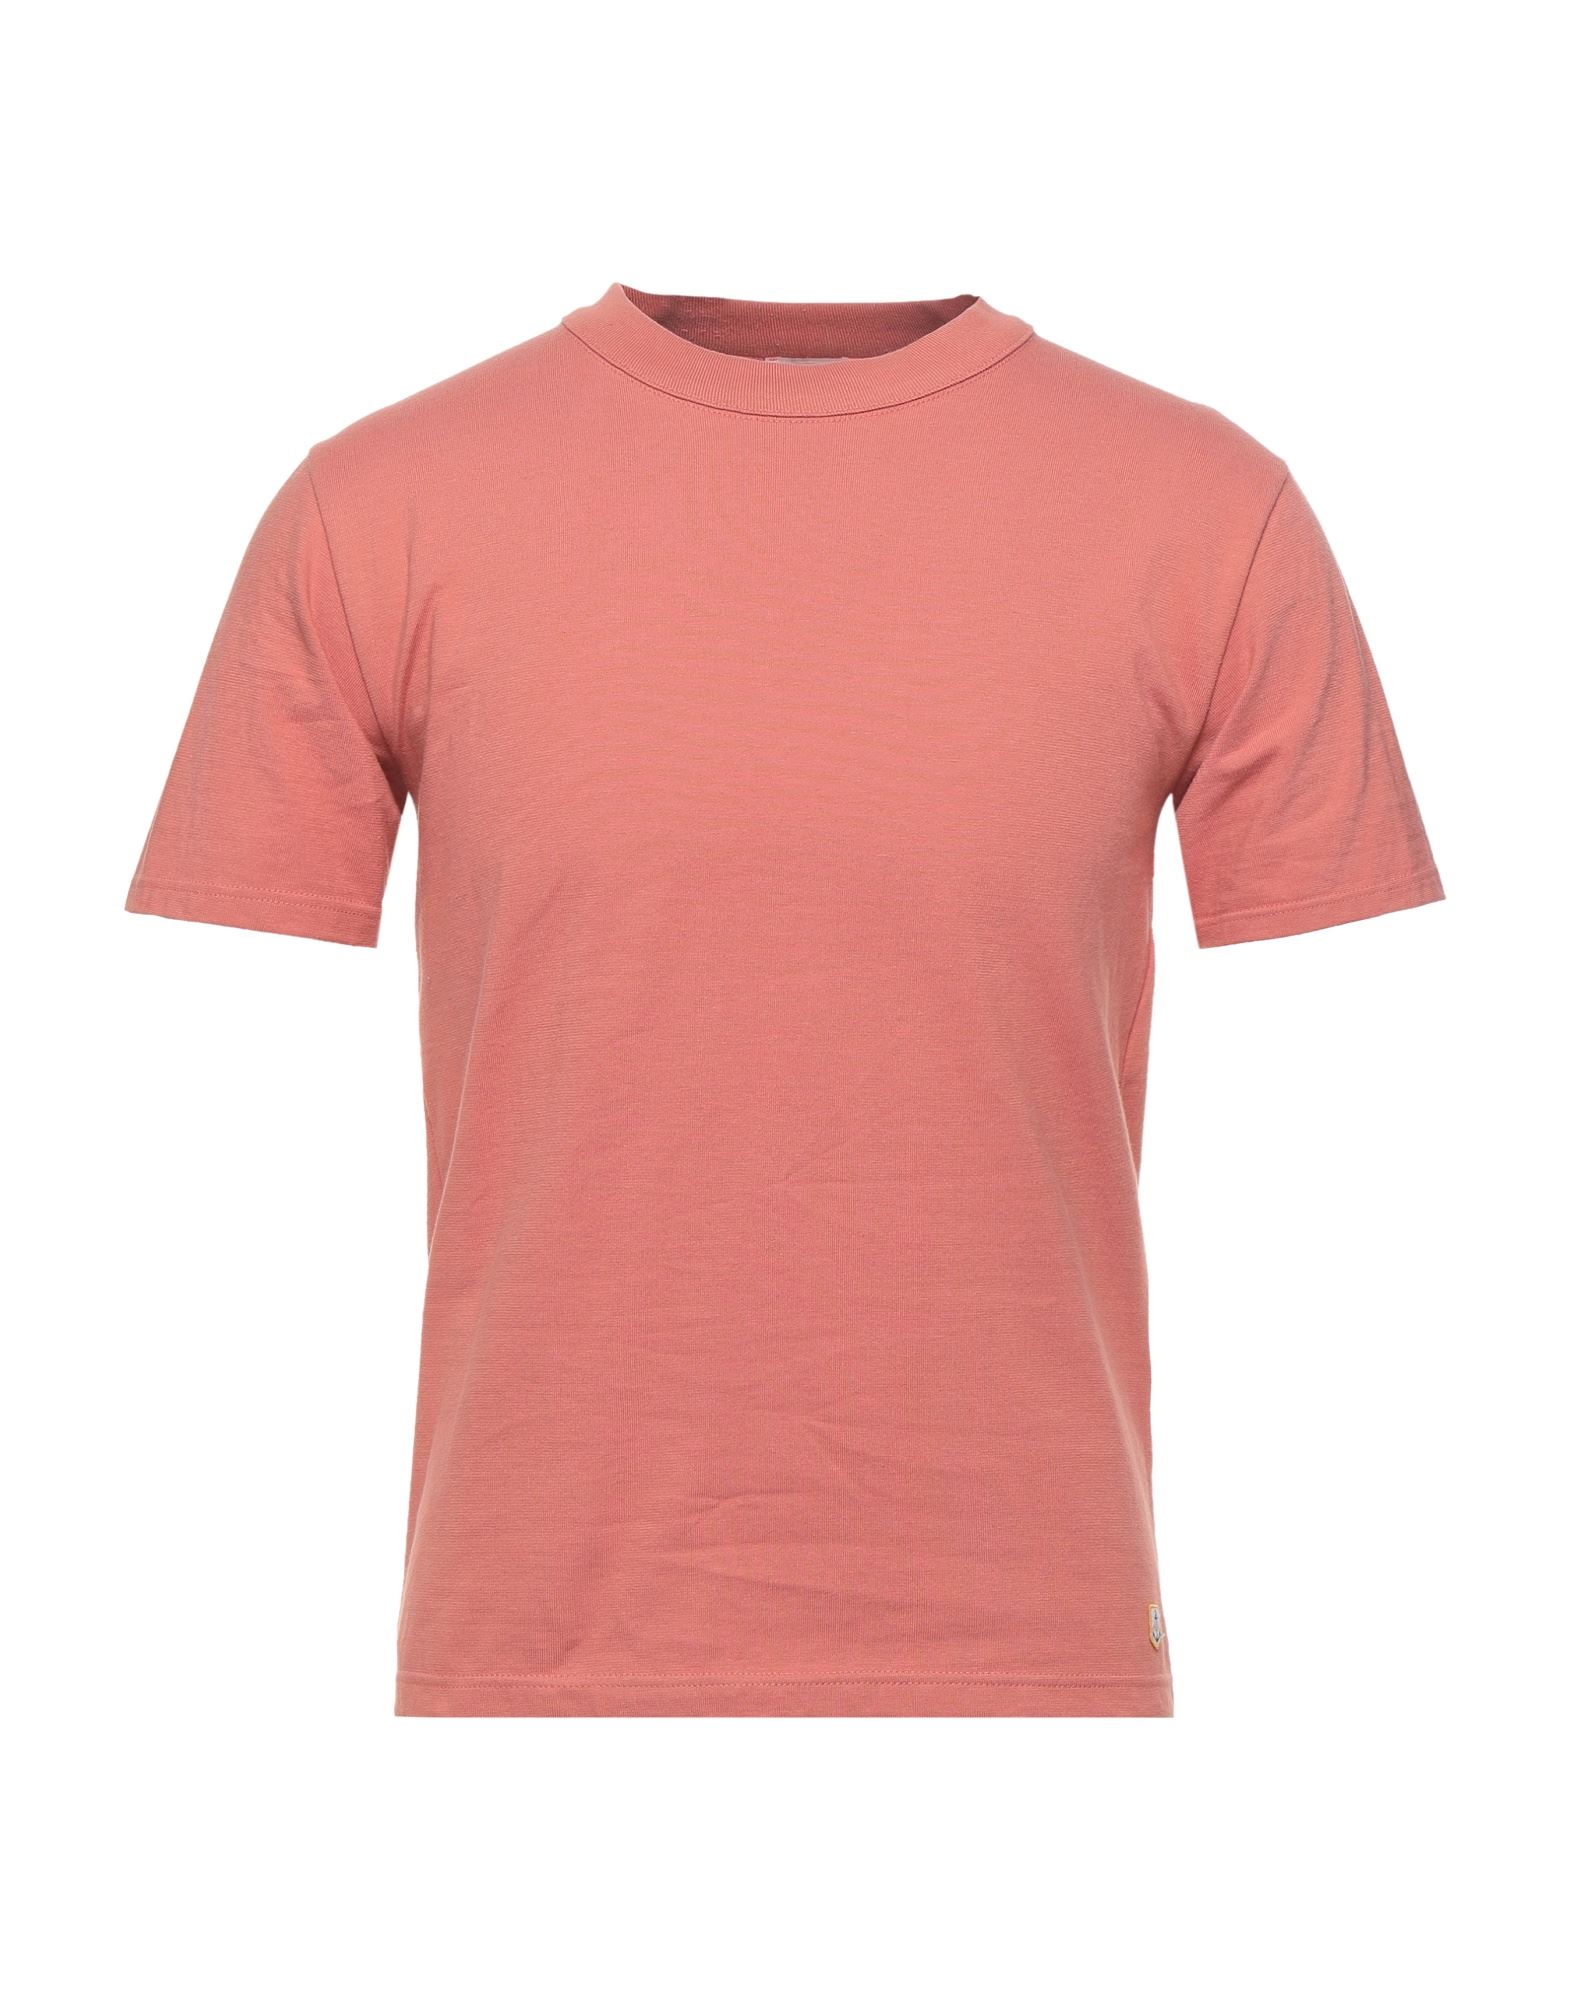 Armor-lux T-shirts In Pink